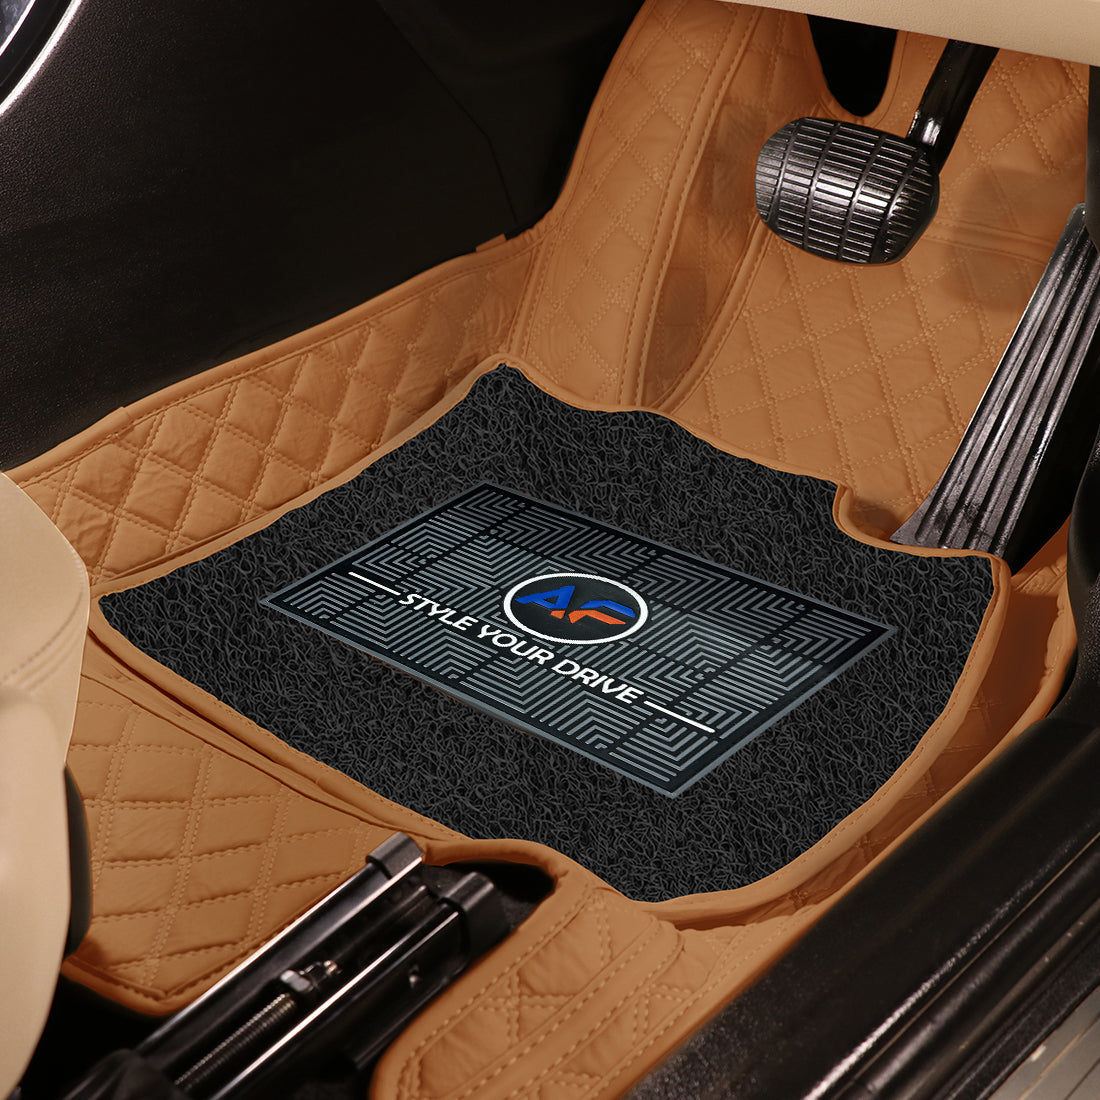 Hyundai Exter 2023-7D Luxury Car Mat, All Weather Proof, Anti-Skid, 100% Waterproof & Odorless with Unique Diamond Fish Design (24mm Luxury PU Leather, 2 Rows)